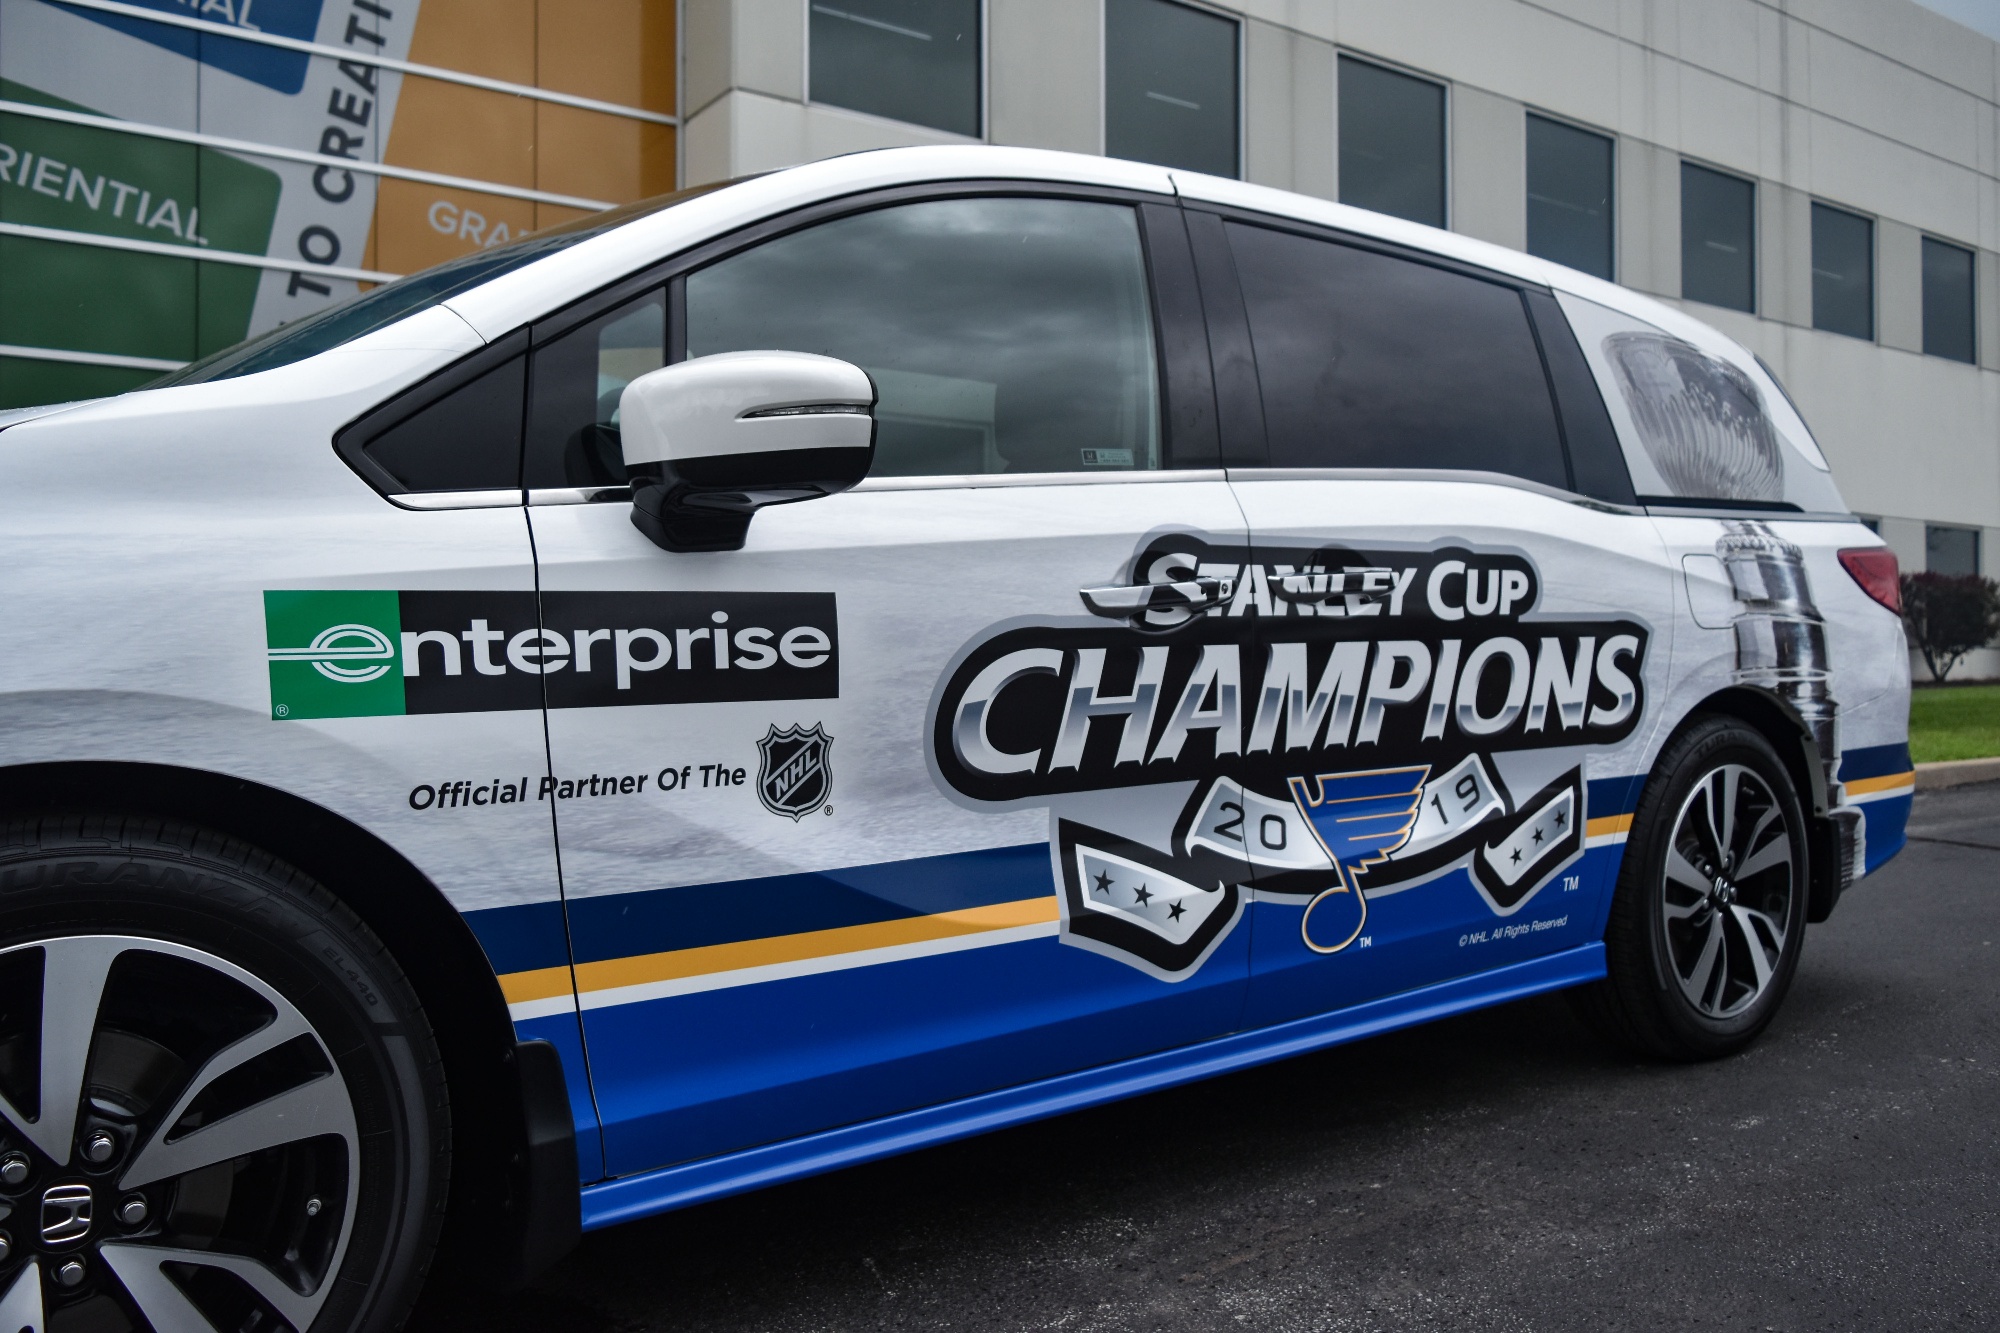 5 Different Ways to Brand Your Company Fleet